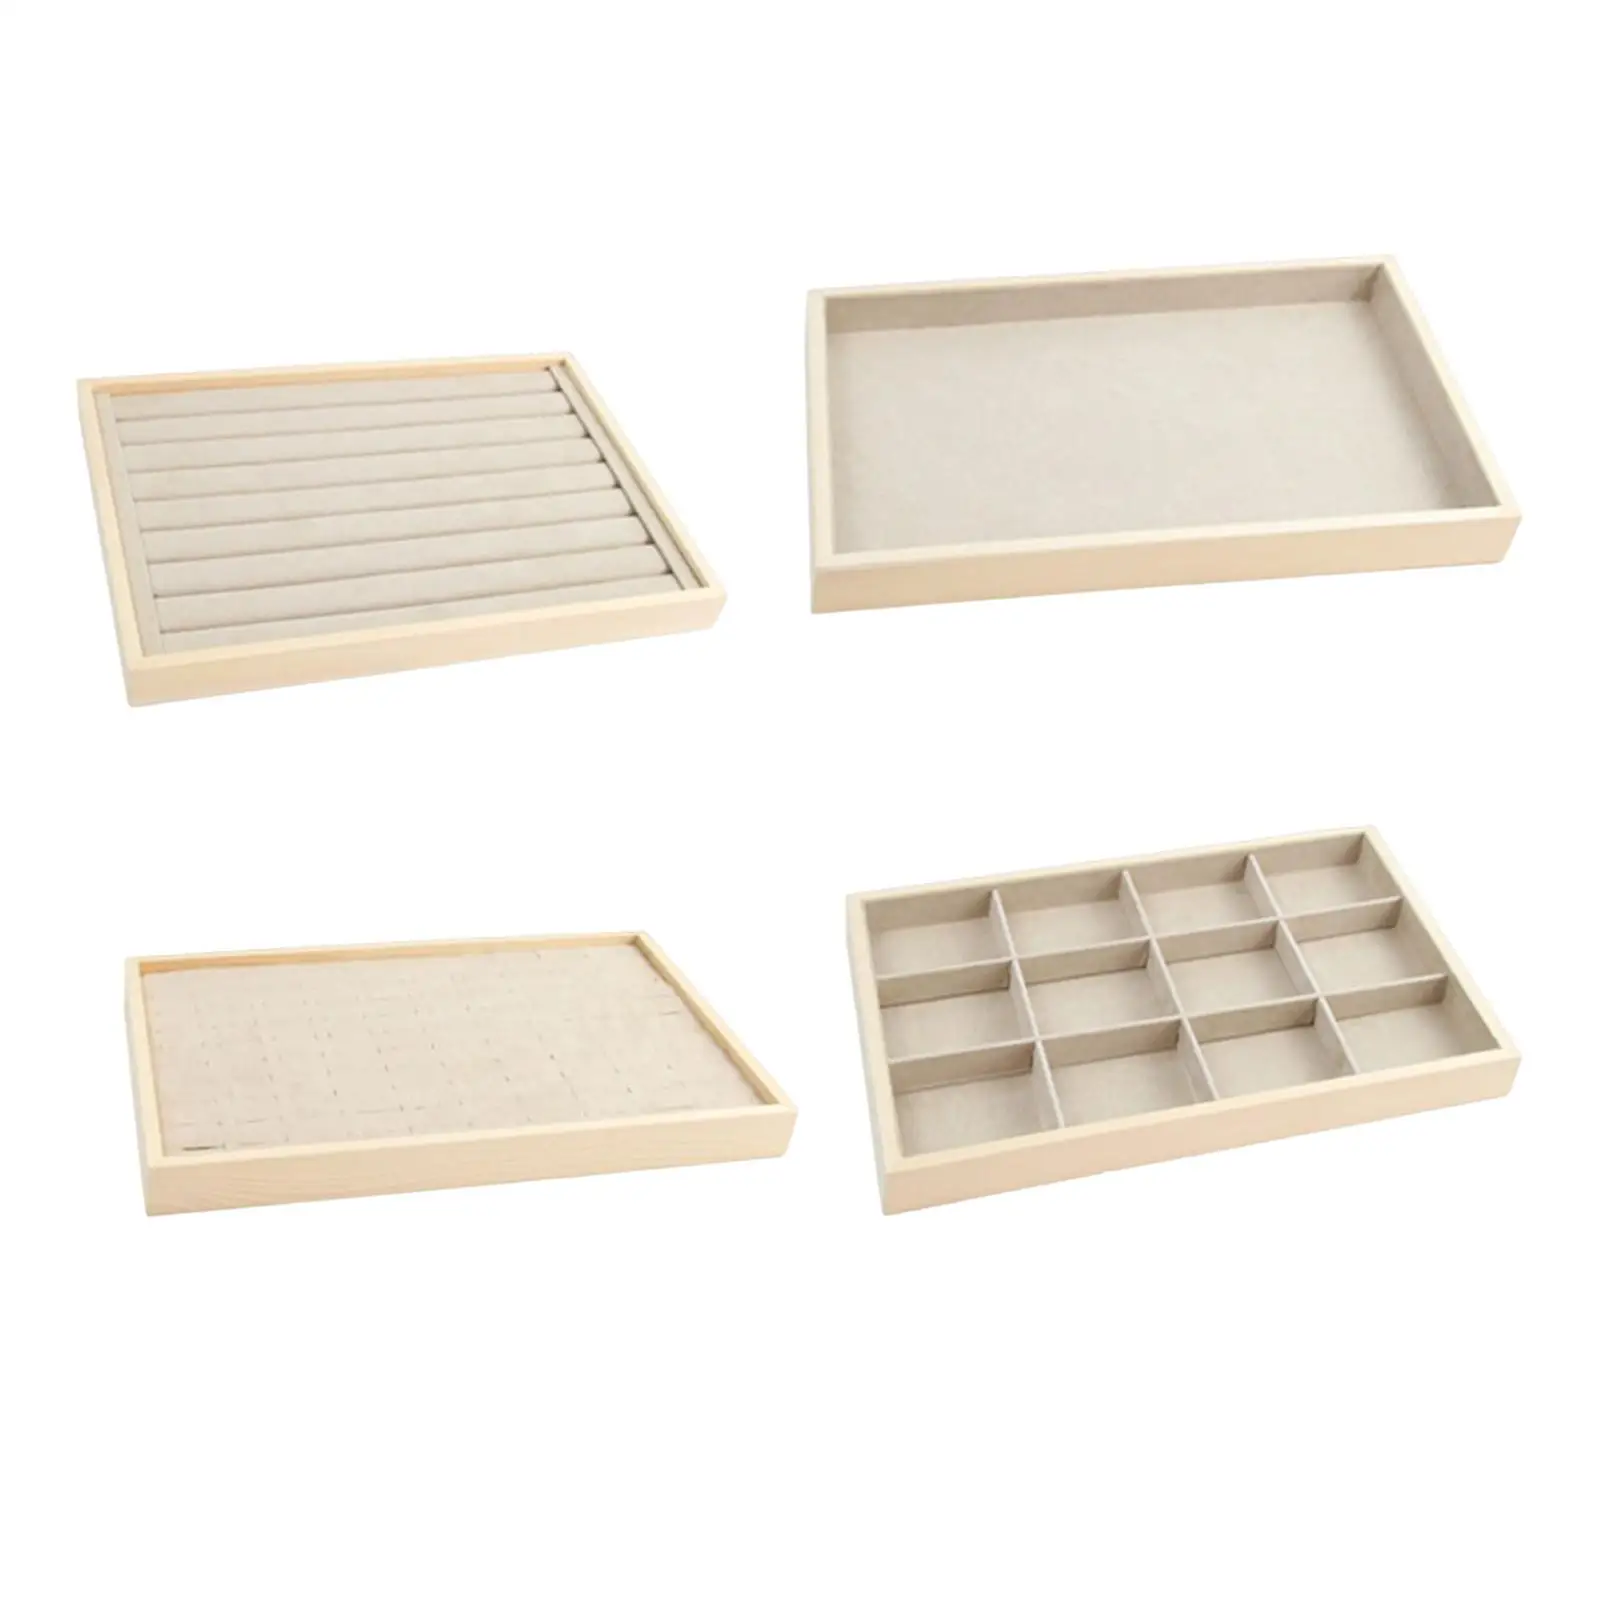 Stackable Jewelry Tray Oragnizer Storage Display Inserts Box Container Showcase Wood for Necklace Bracelet Anklets Ring Drawers